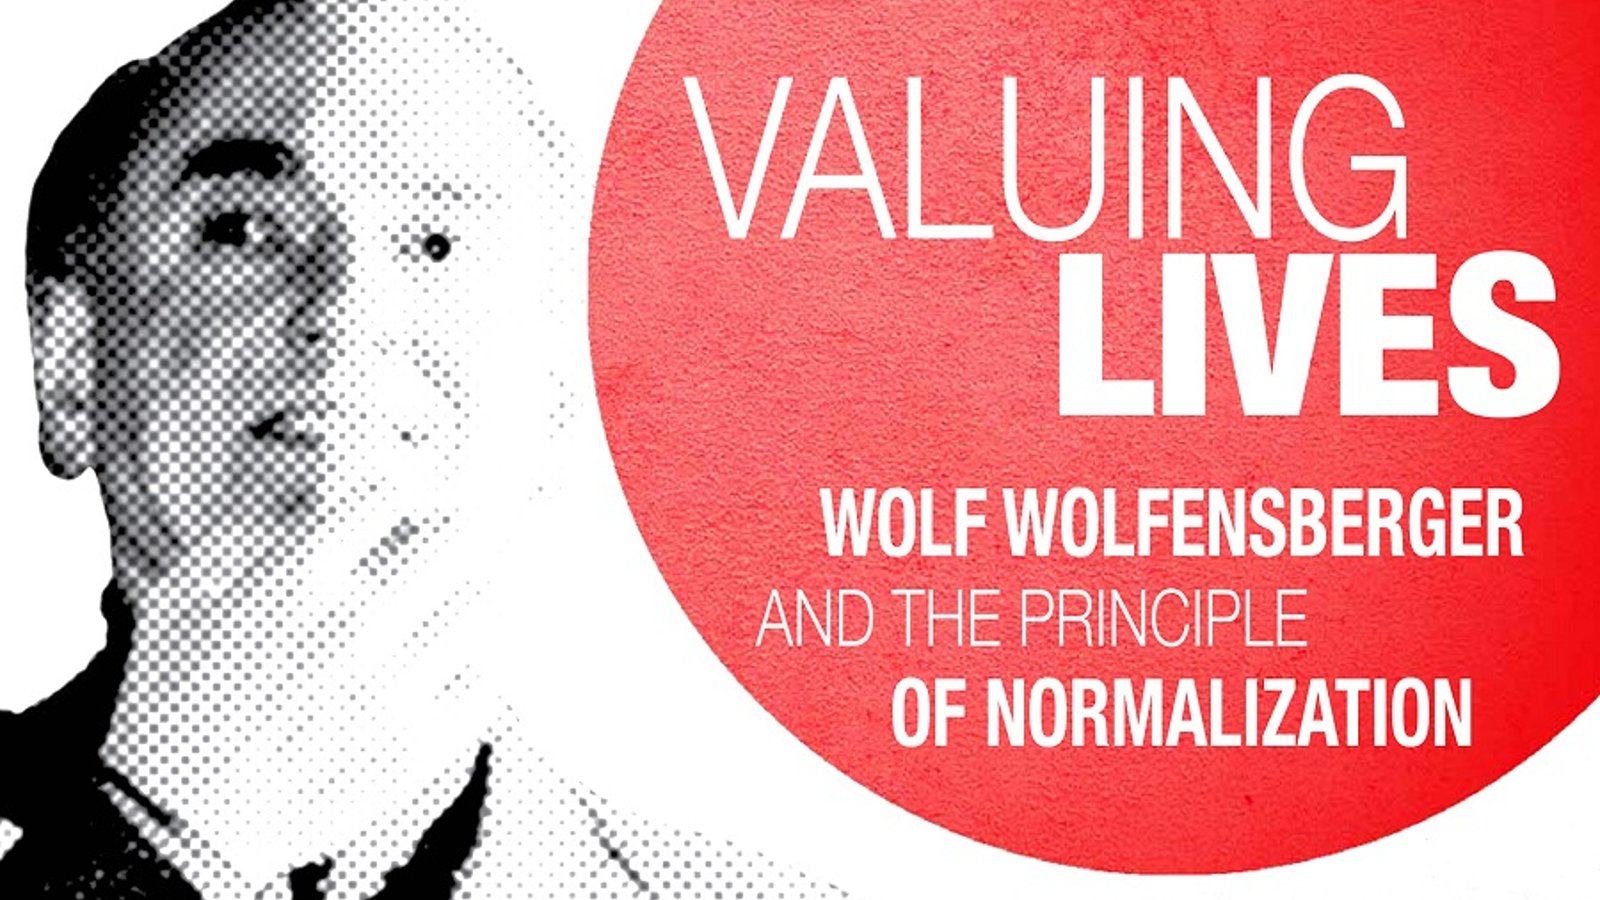 Valuing Lives - Wolf Wolfensberger and the Principle of Normalization